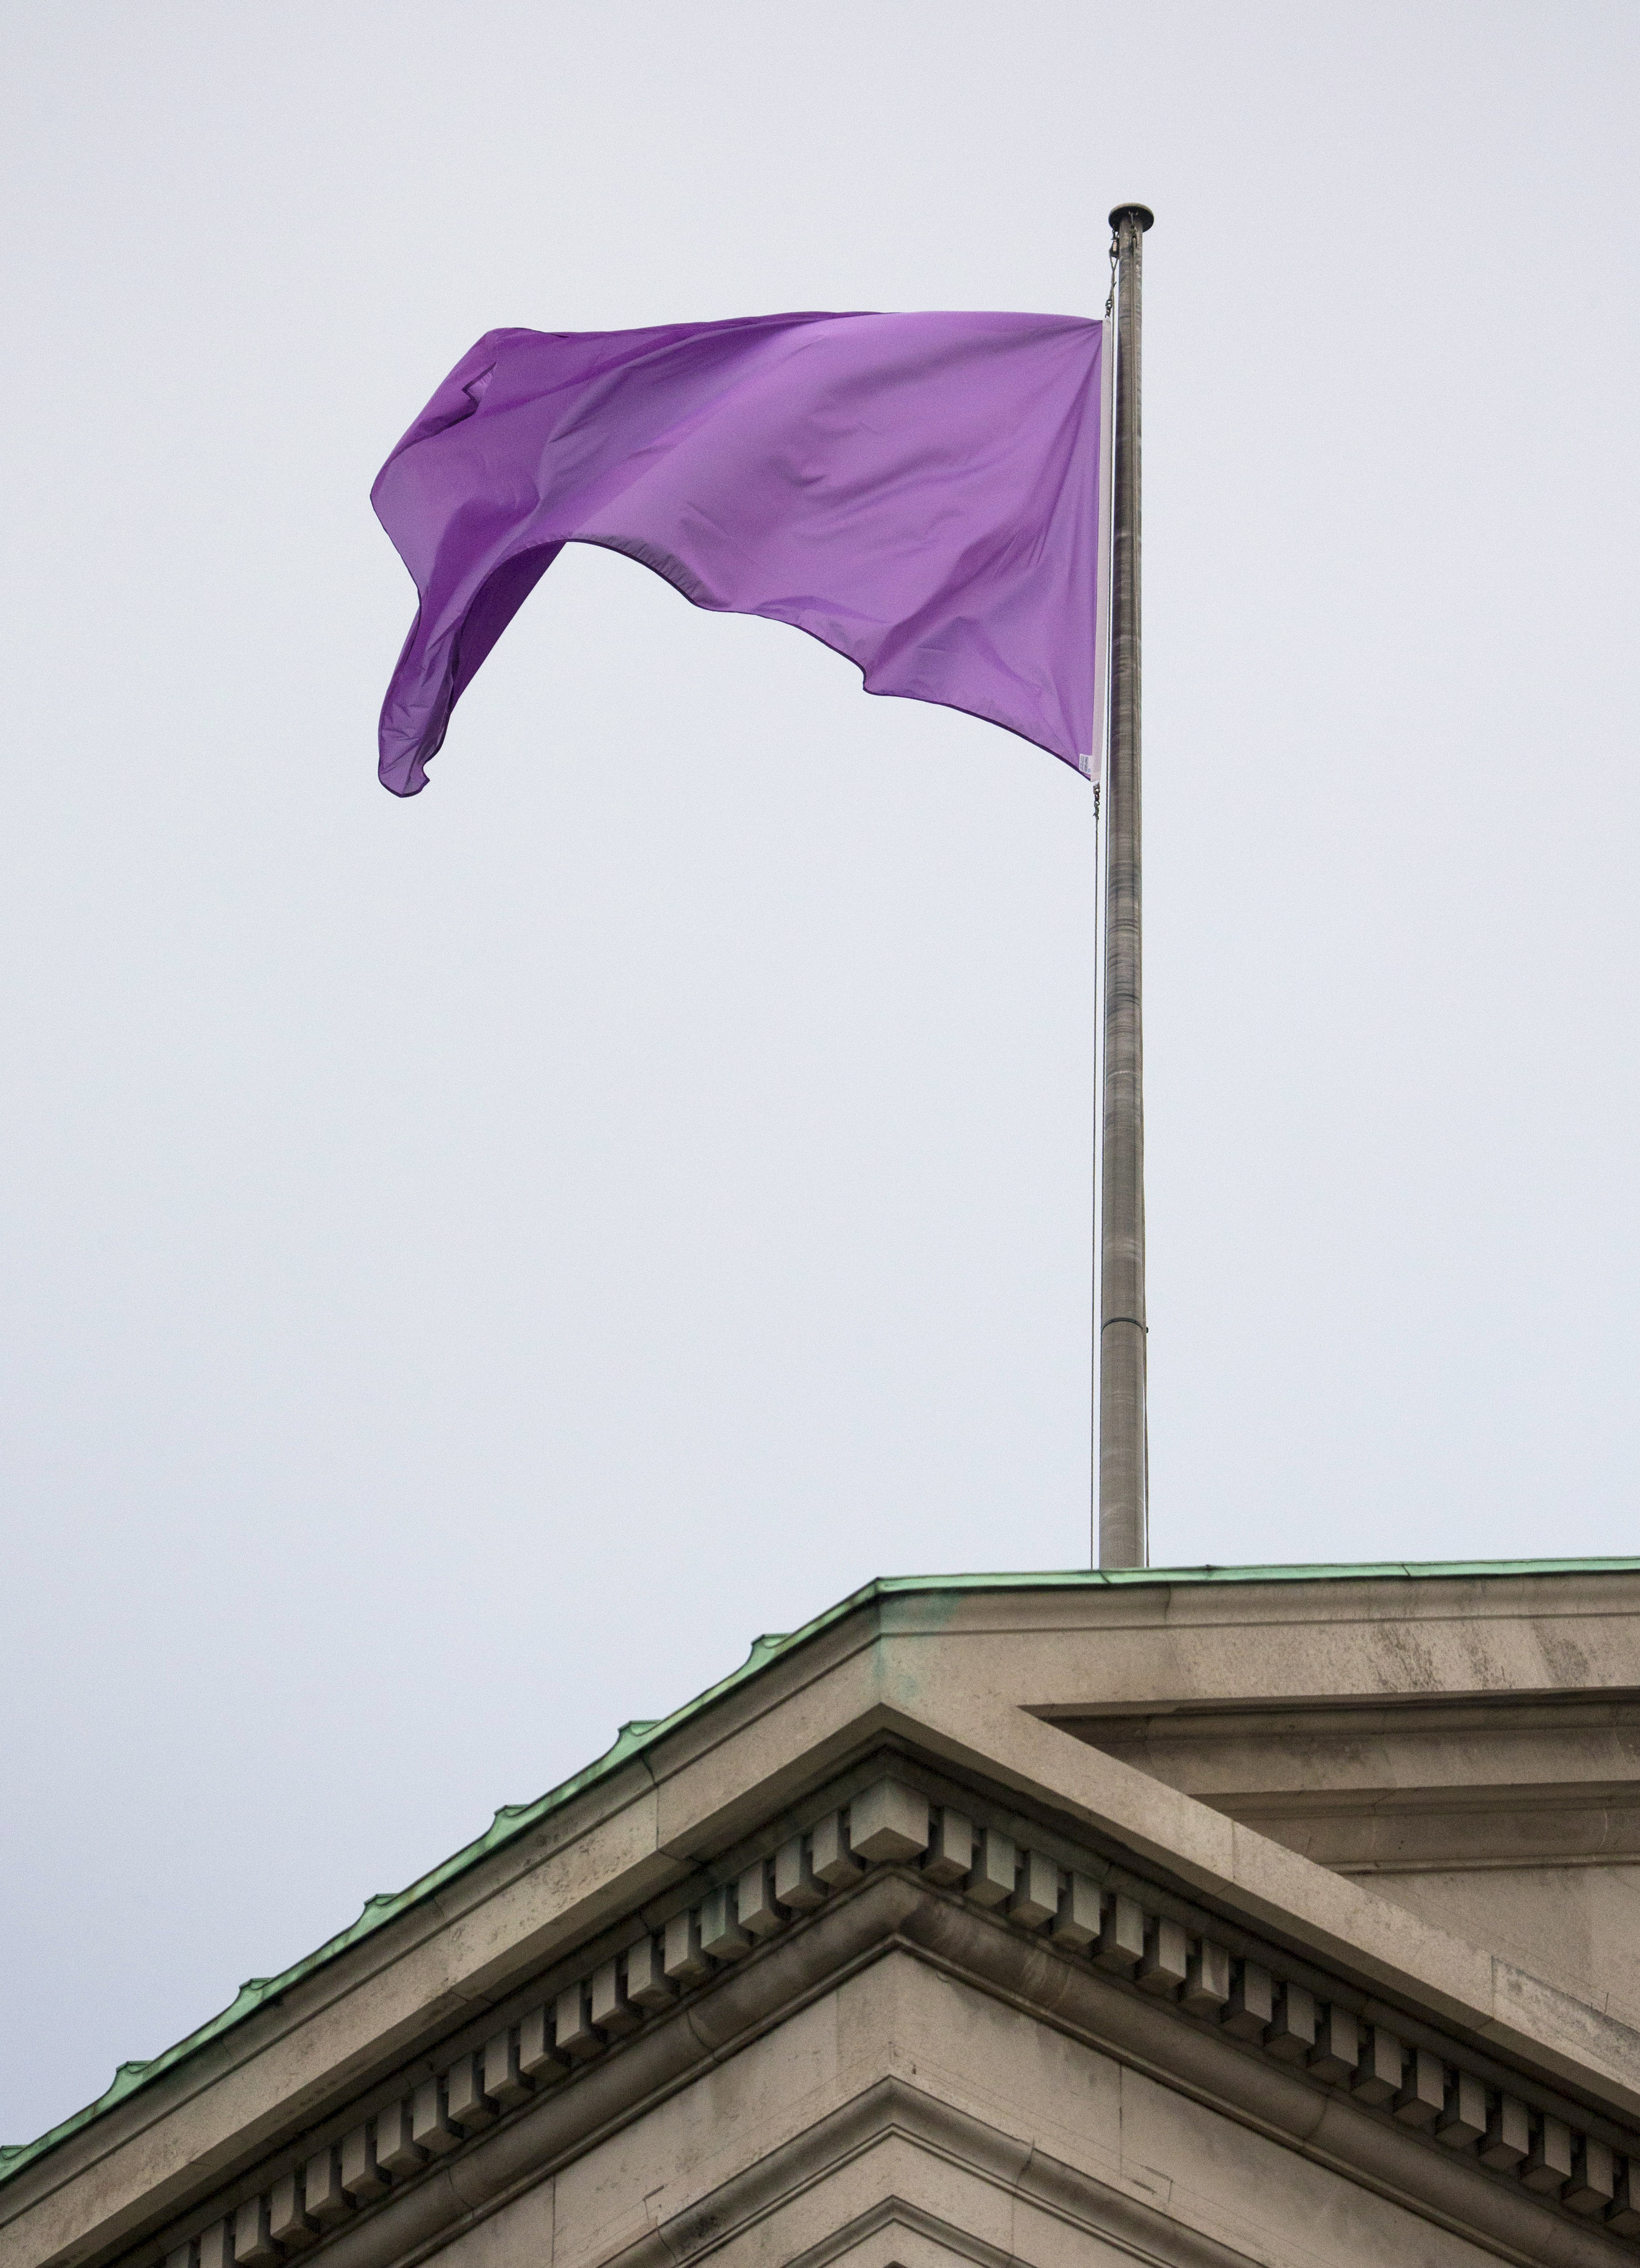 A purple flag flies over the Ministry of Defence